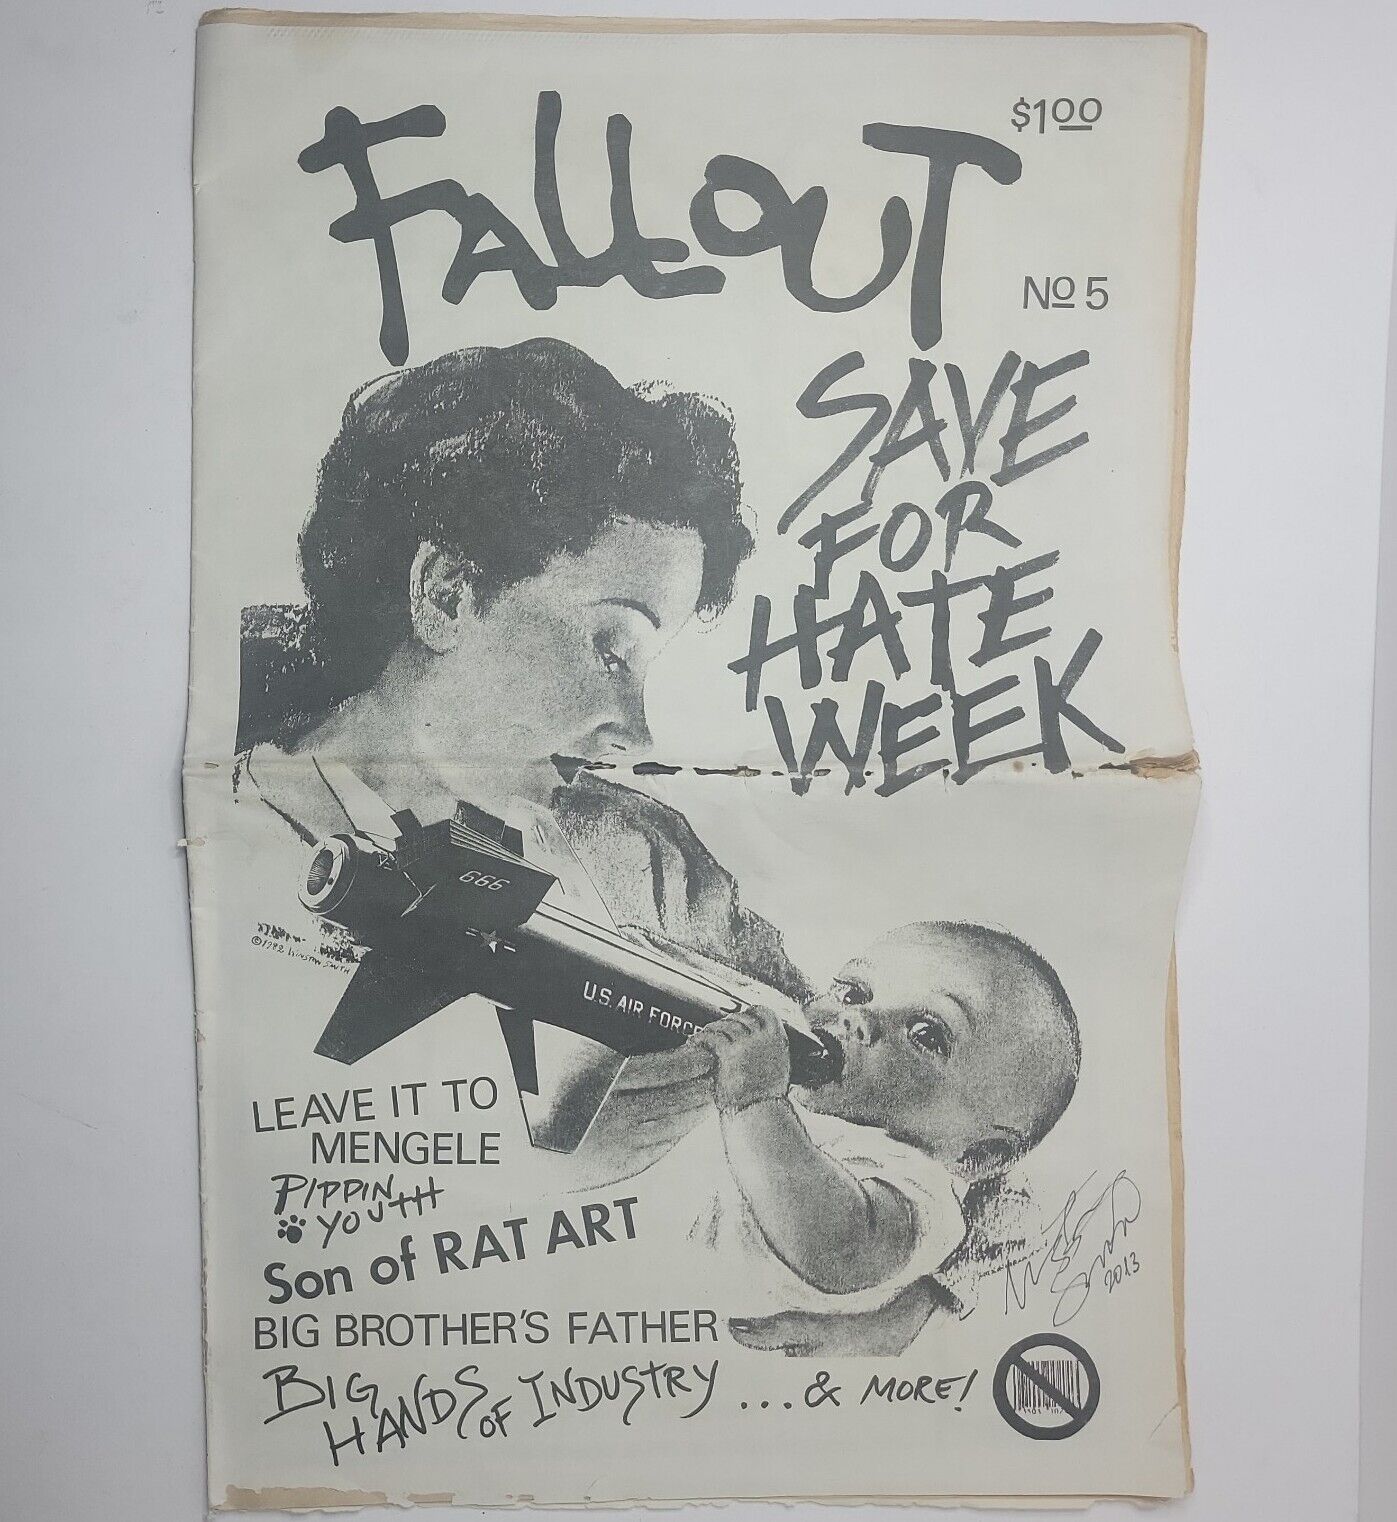 Fallout #5 1980's Punk Zine Signed By Winston Smith Dead Kennedys Art Hardcore